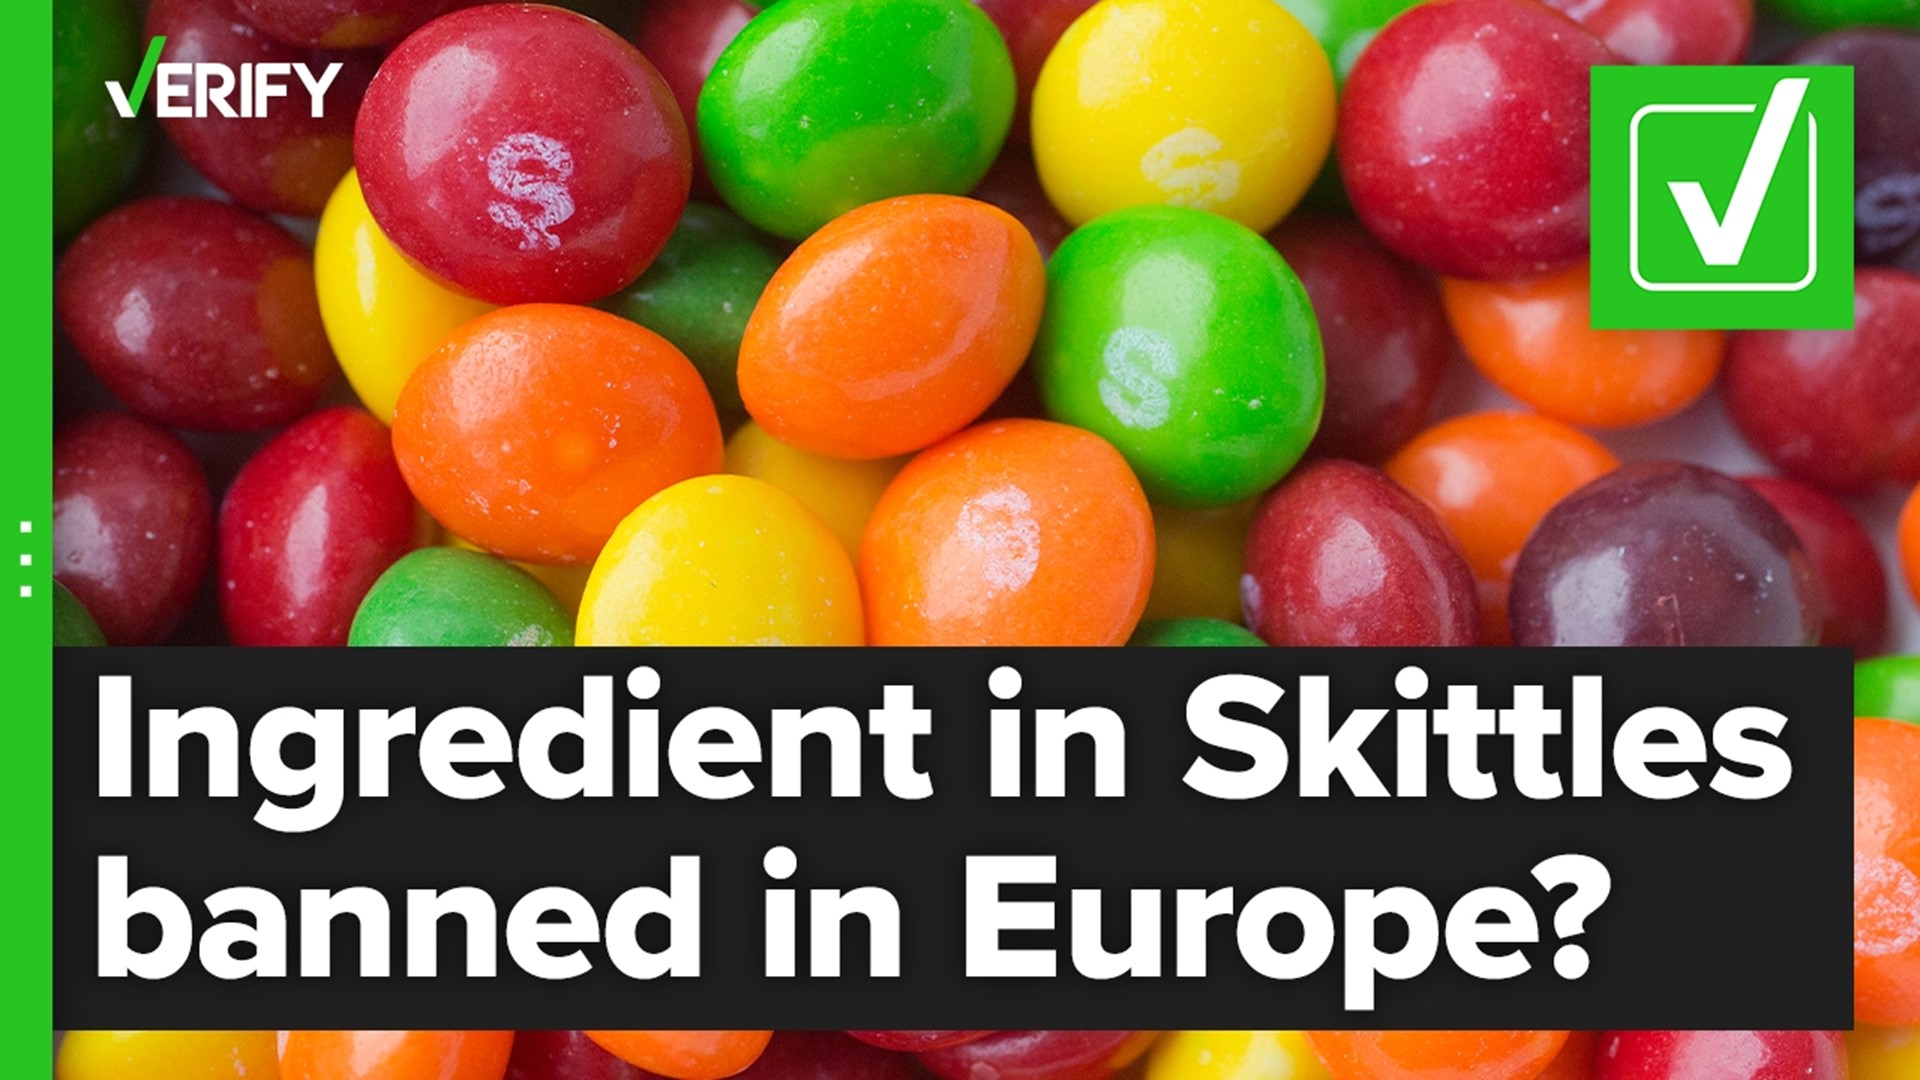 Titanium Dioxide, banned in Europe, is a common food additive in the U.S.